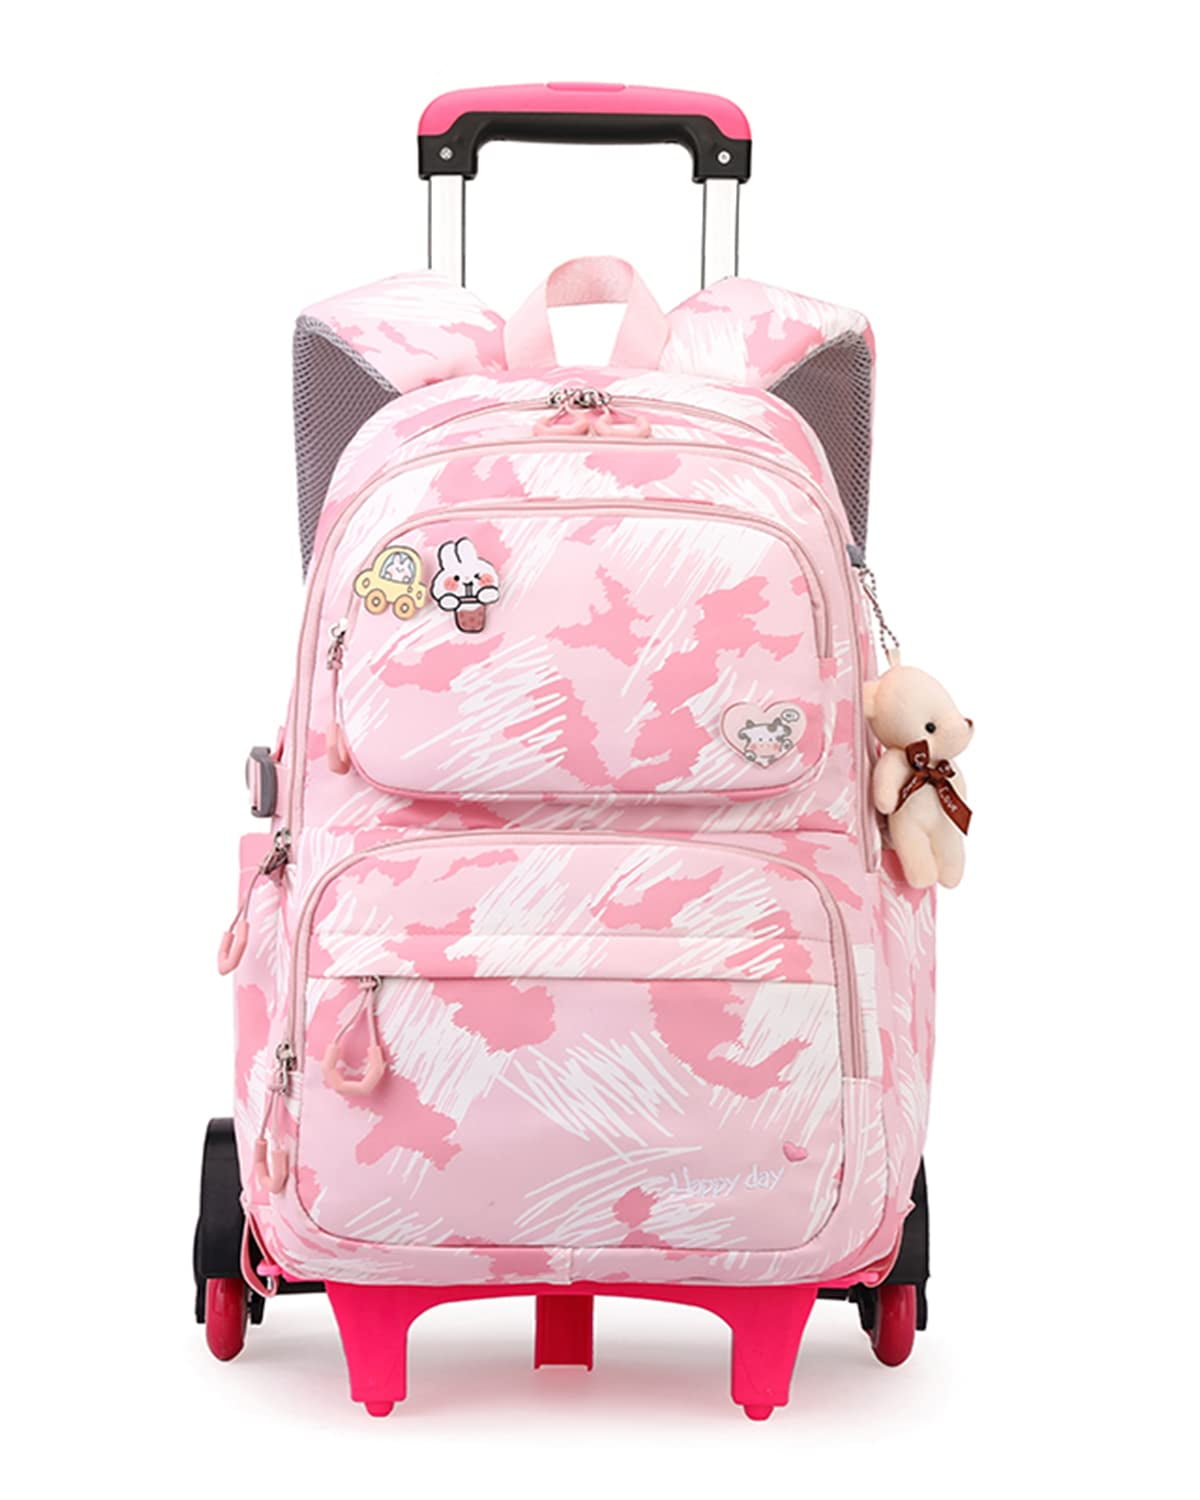 lvyH Kids Rolling Backpack 16 Inches Girls Boys Lightweight Trolley Wheeled  Schoolbag for School Travel,Pink 